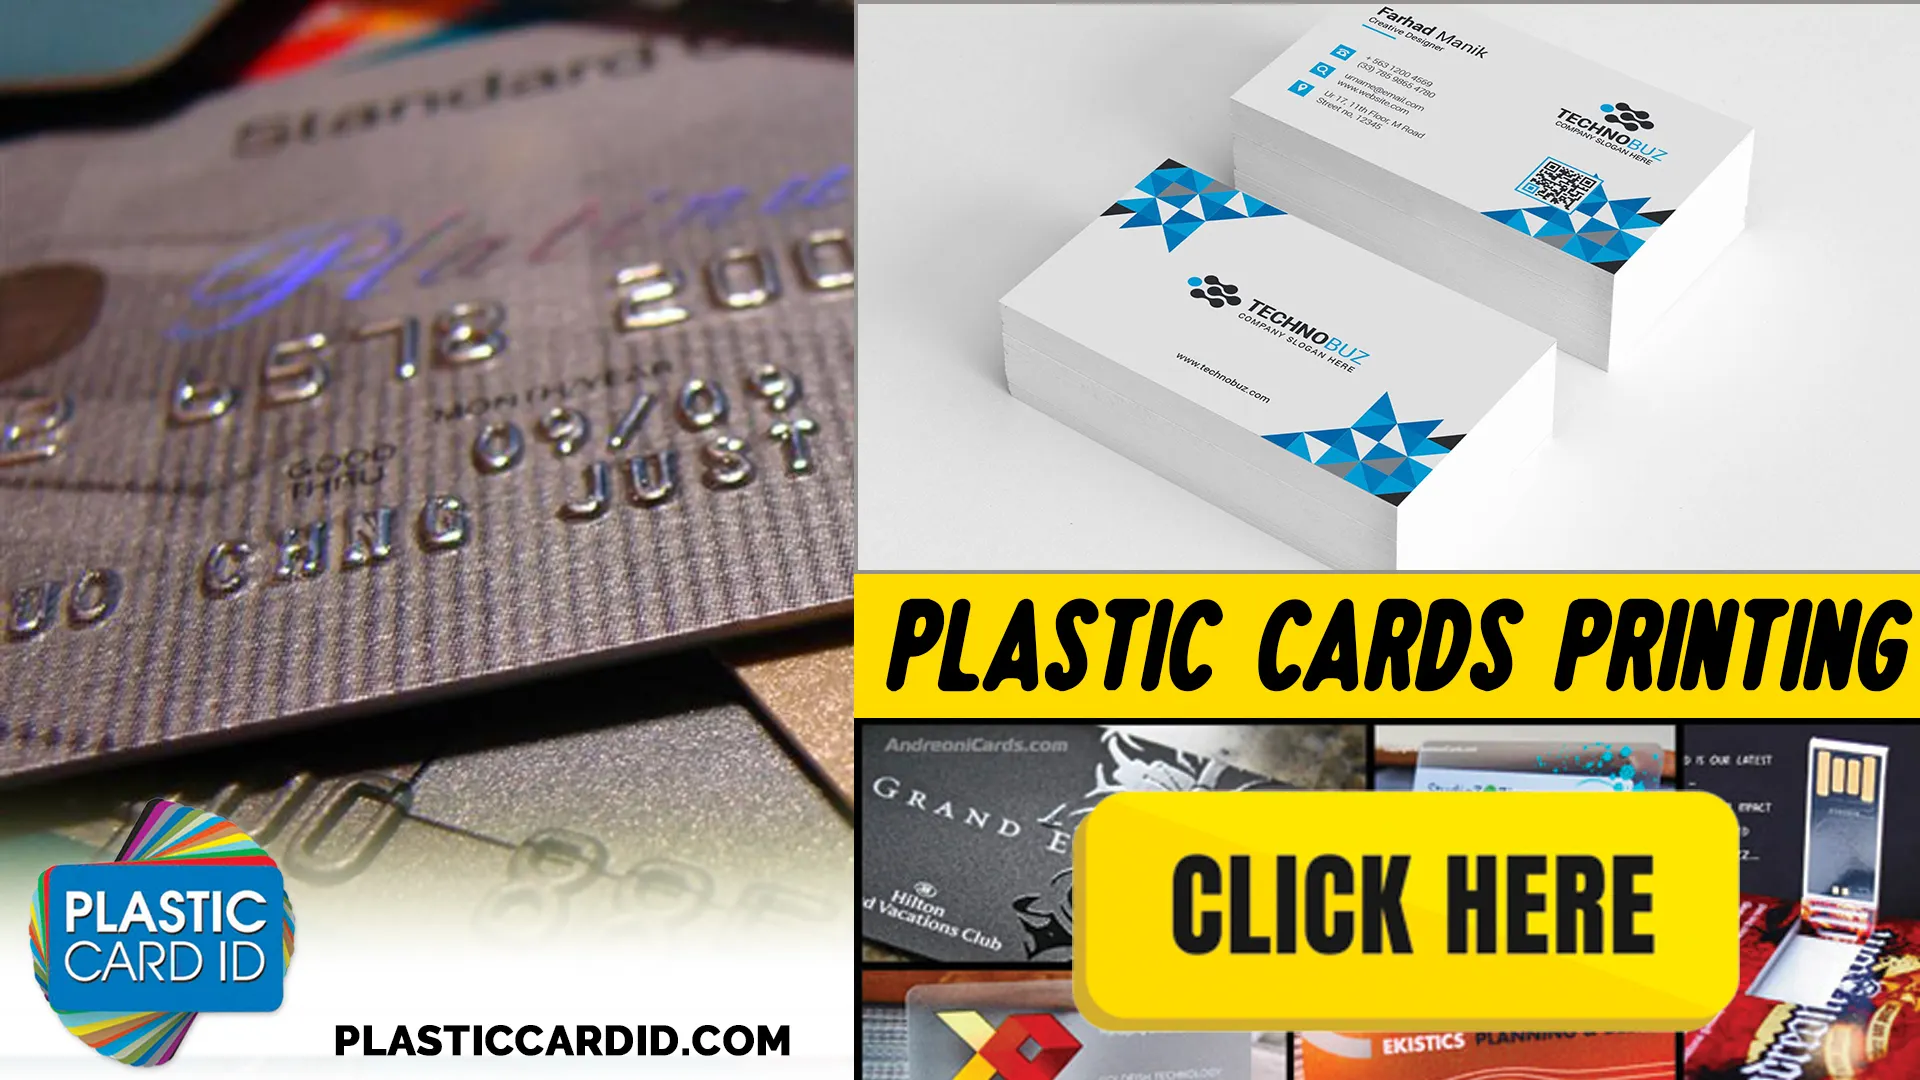 Maximize Your Card Printer's Capabilities with Plastic Card ID
's Accessories